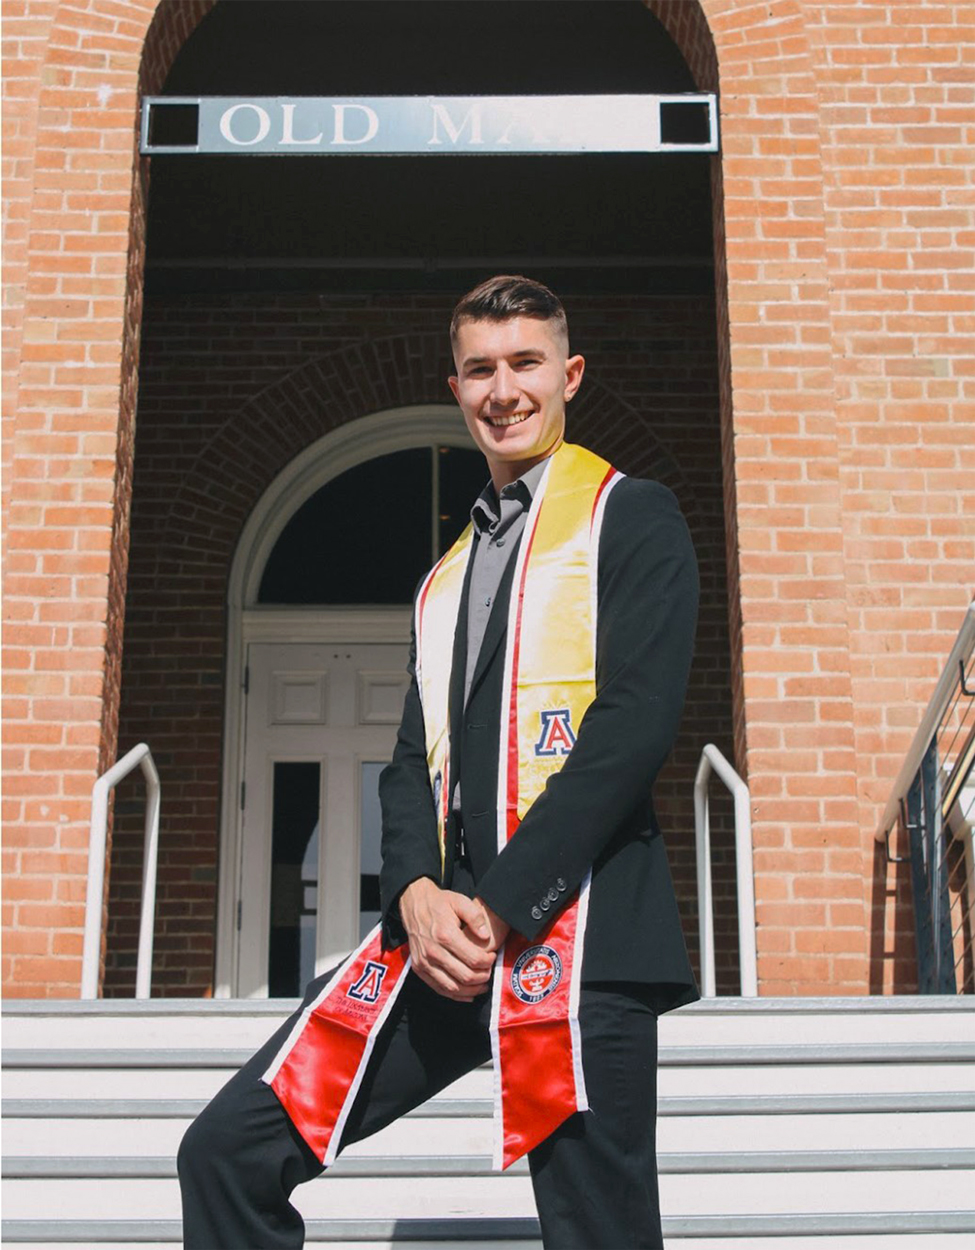 Luke Hoeferkamp in a dark grey suit with graduation stoles in red and yellow in front of Old Main